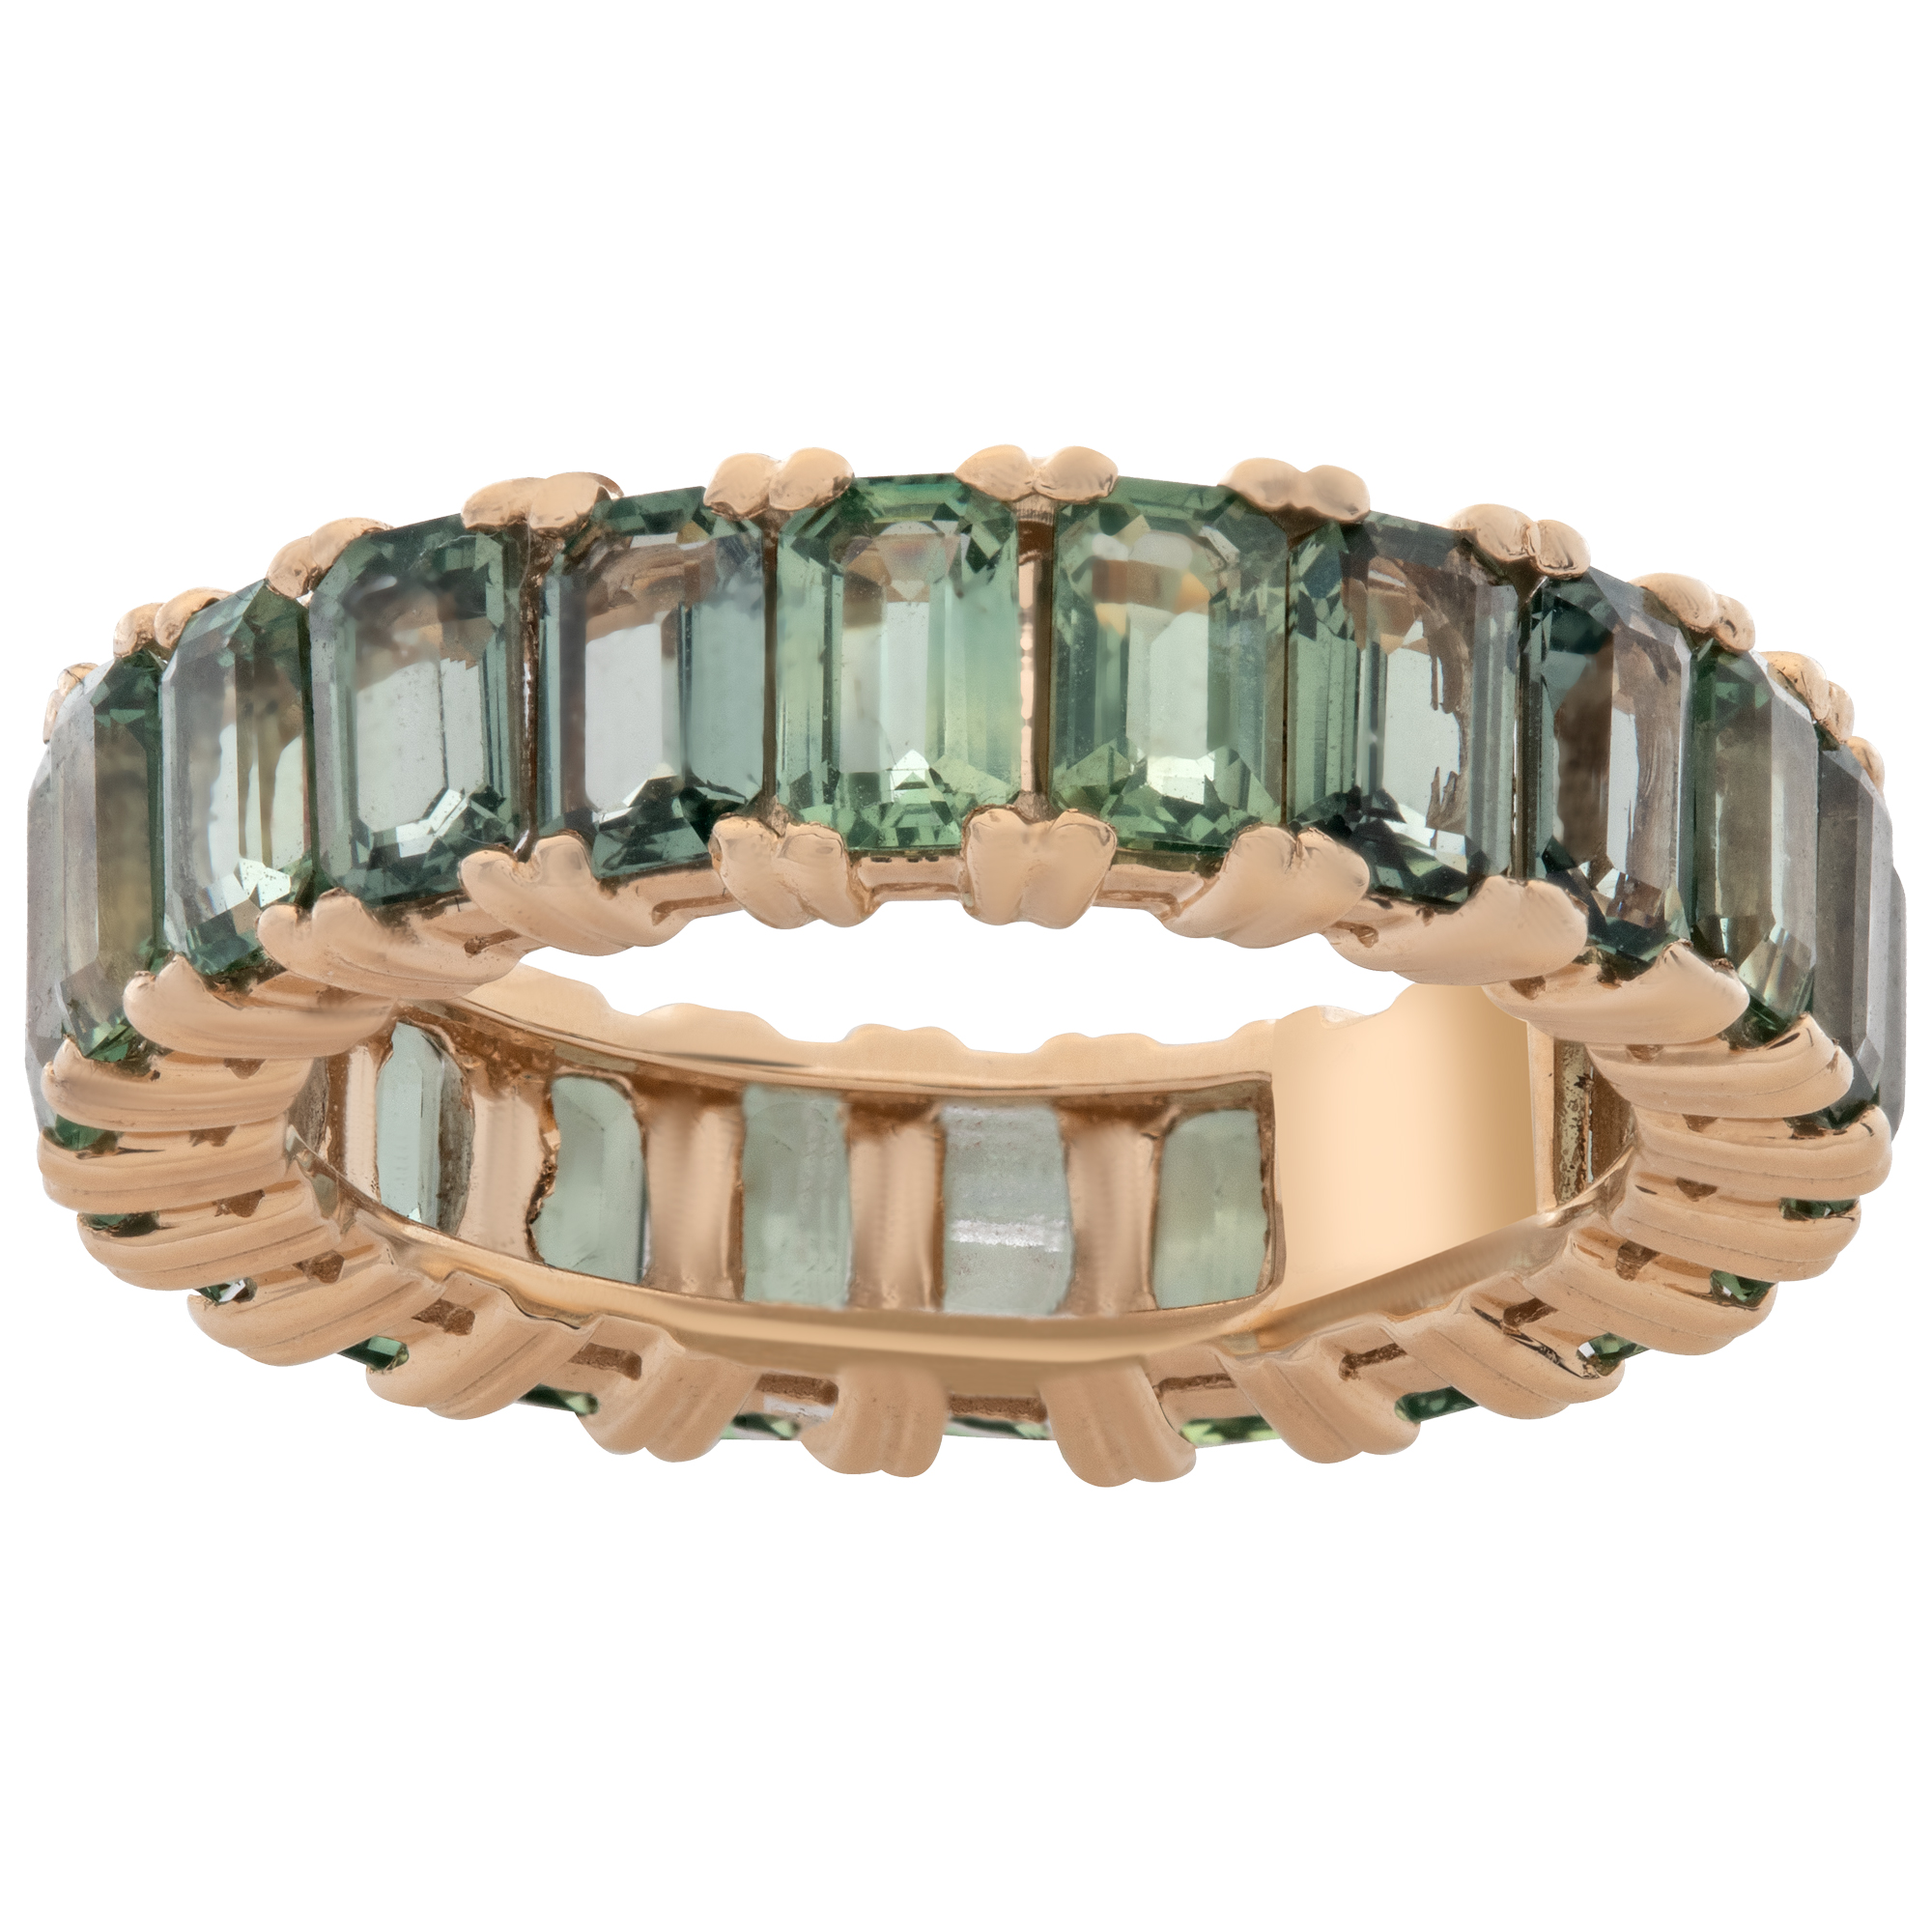 Green Sapphire eternity band set in 14k yellow gold